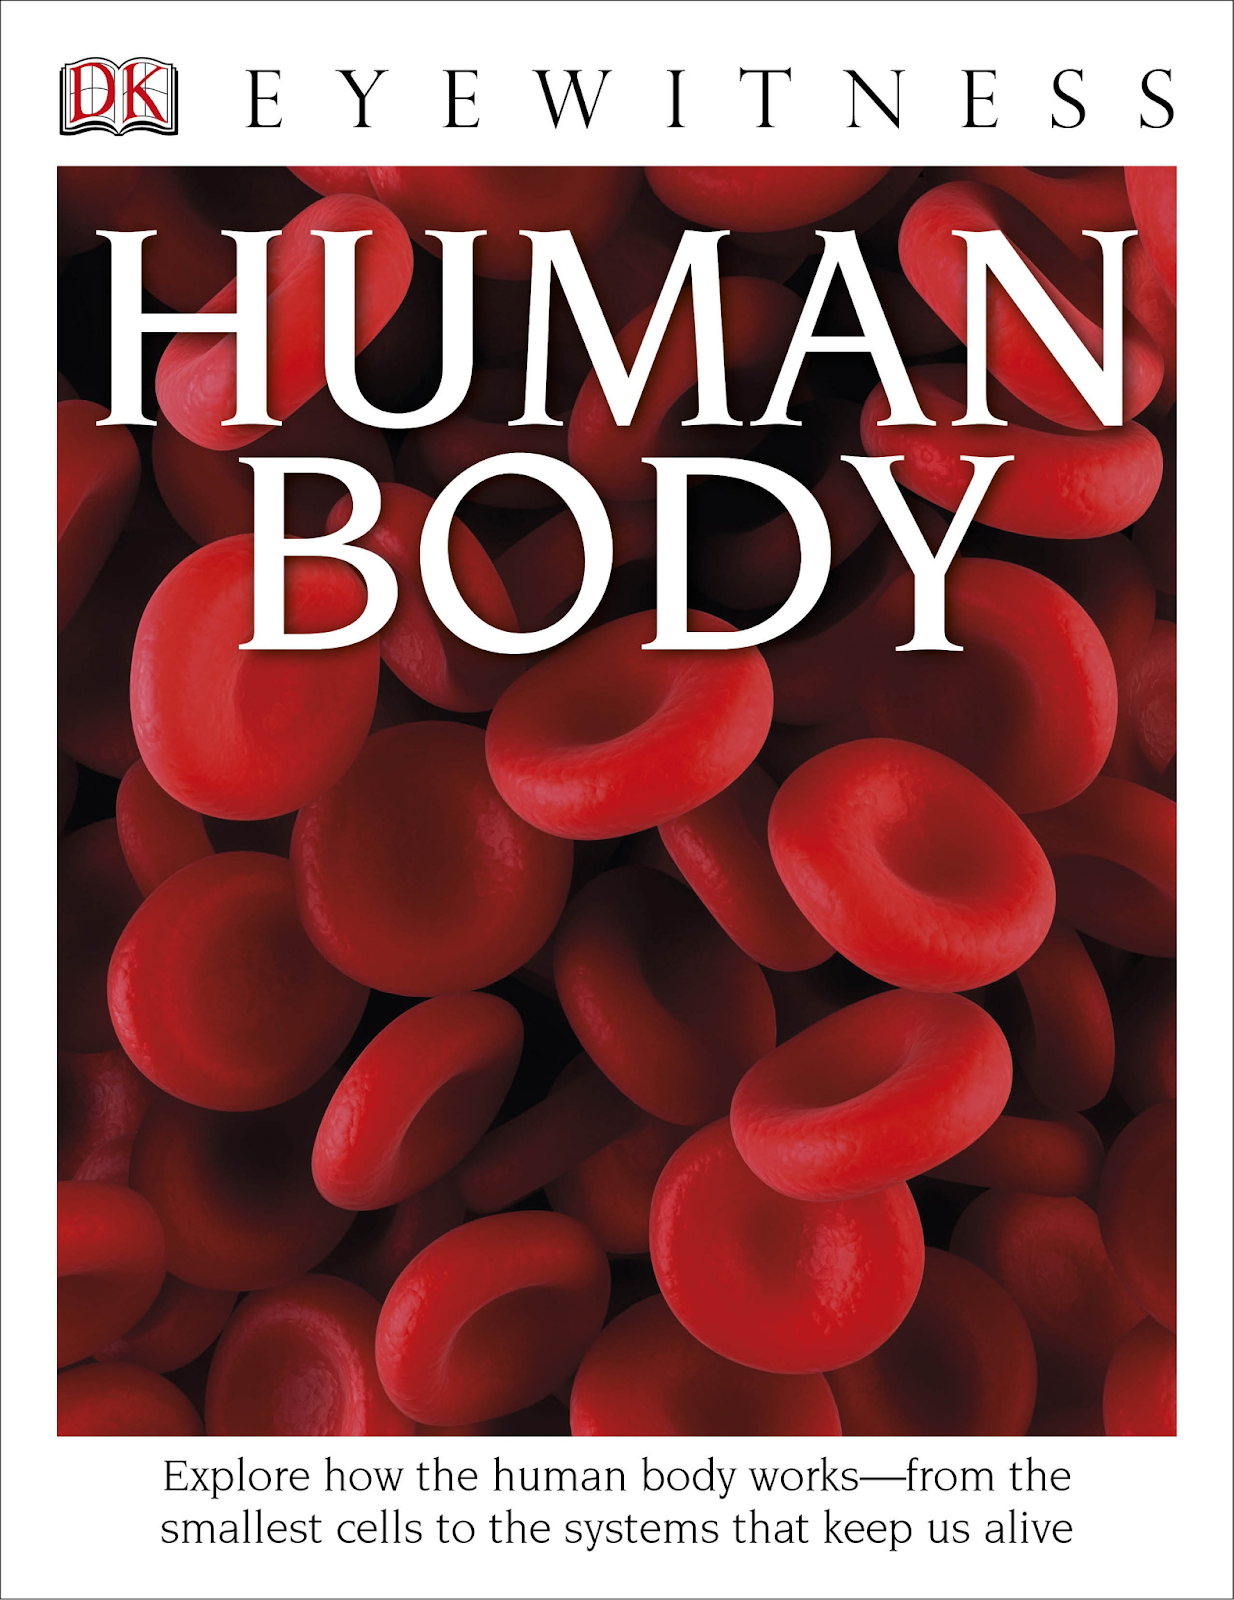 DK Eyewitness Books: Human Body Explore How the Human Body Works—from the Smallest Cells to the Systems That Keep Us Alive by Richard Walker (non-fiction ebook)